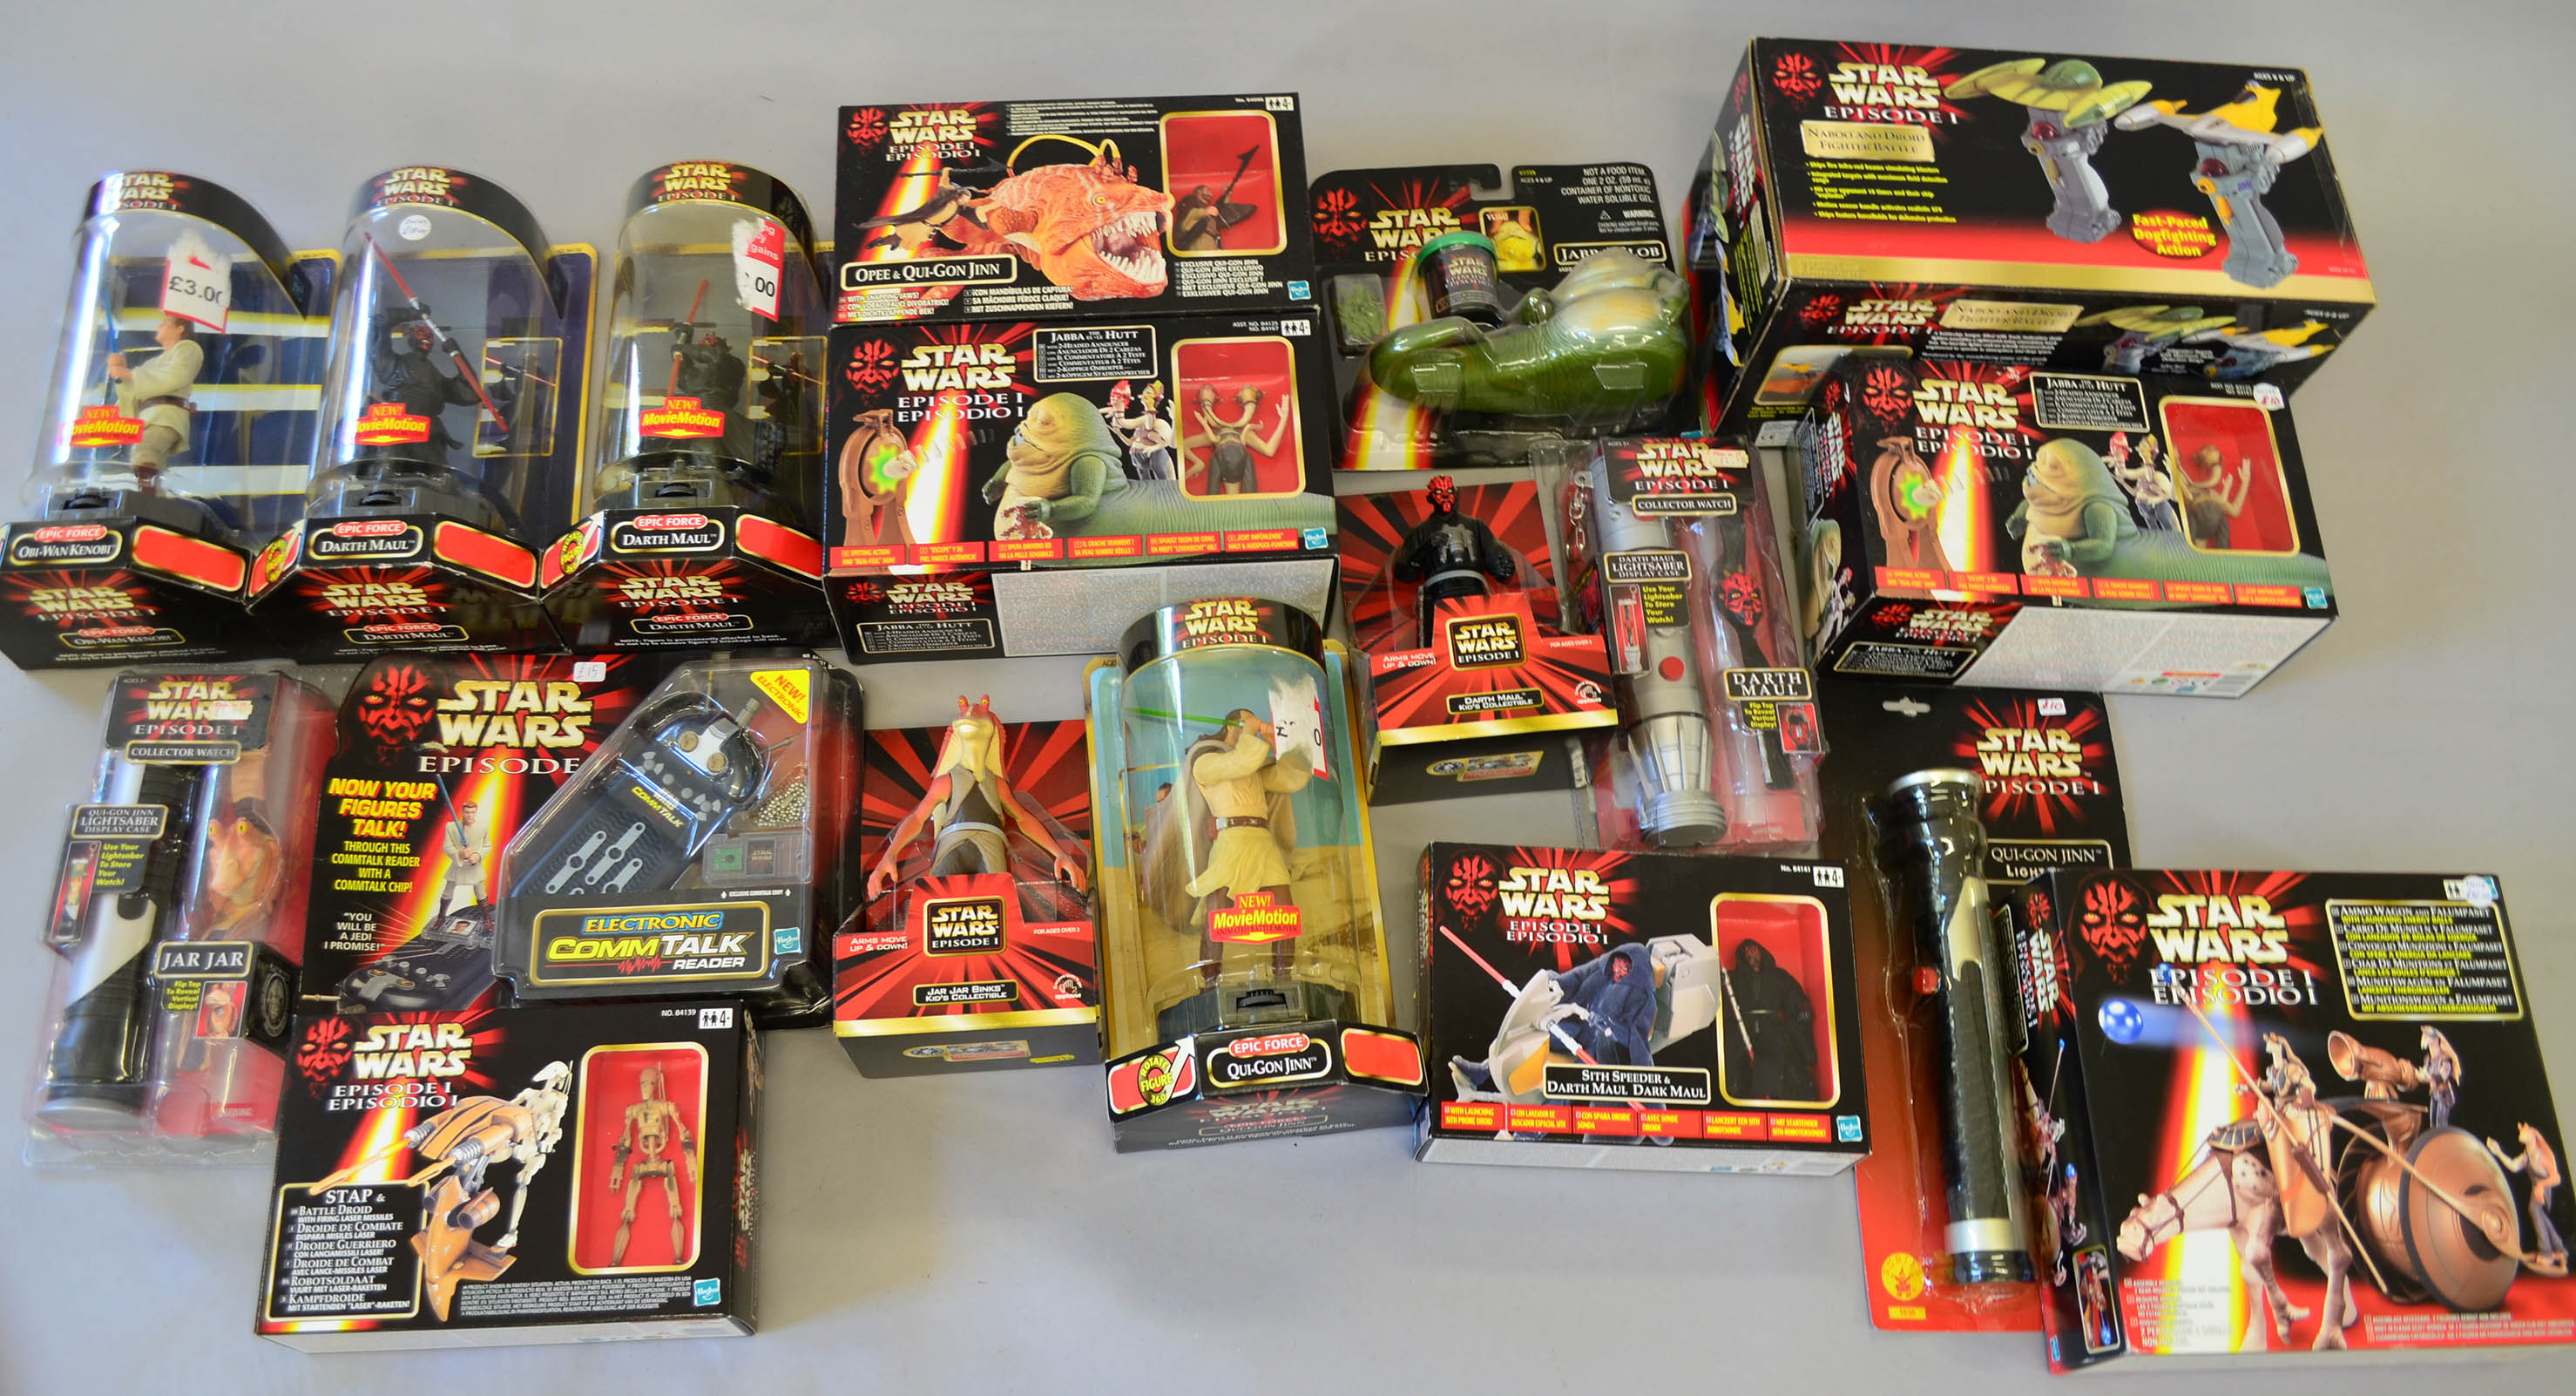 Star Wars Episode I toys, includes Hasbro, Tiger and Applause, including: Hasbro Jabba Glob;